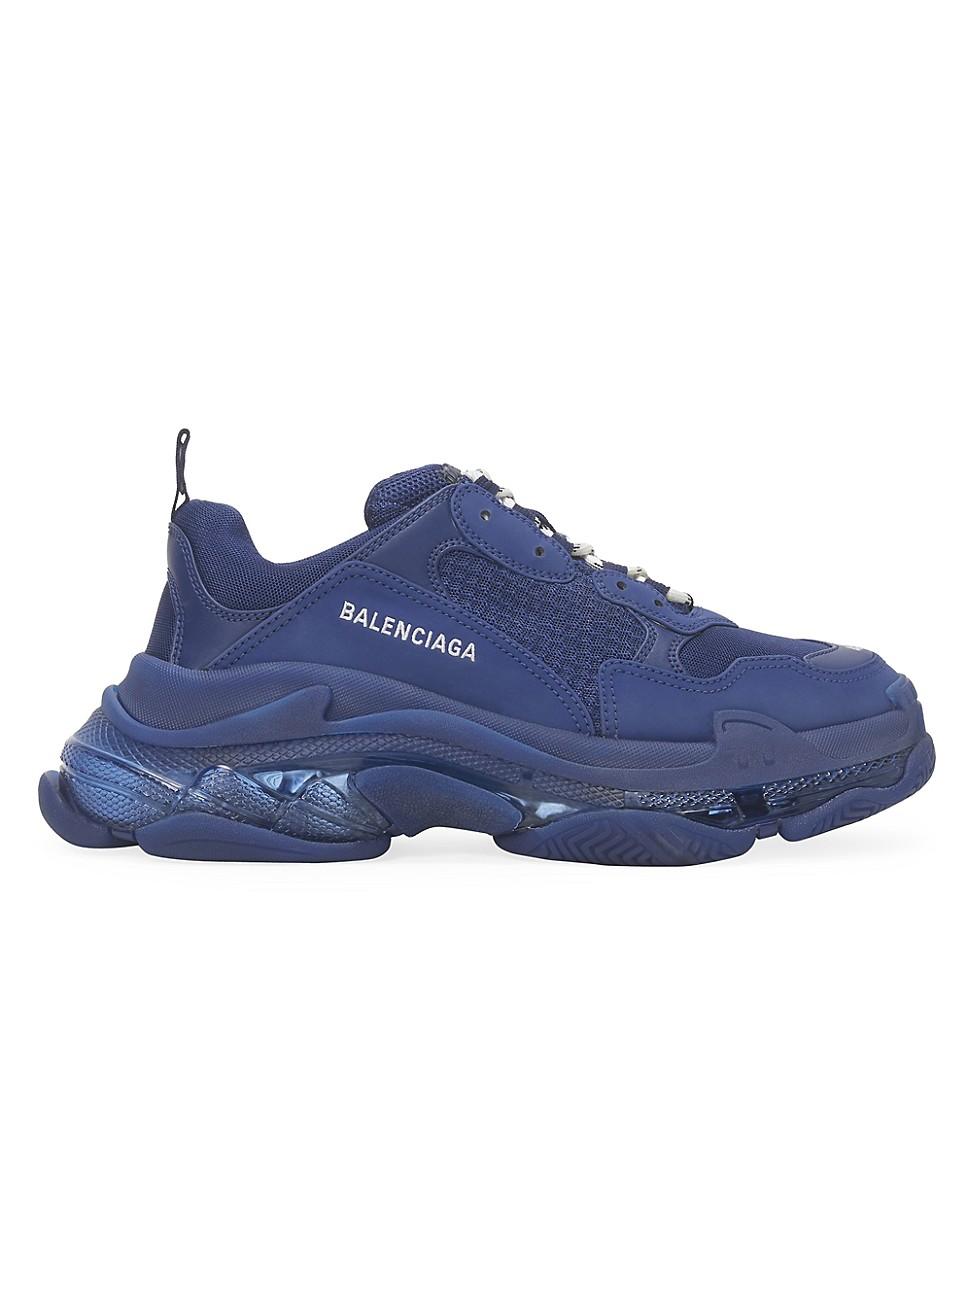 Balenciaga Triple S Airsole Leather And Mesh Trainers in Navy Blue (Blue) |  Lyst